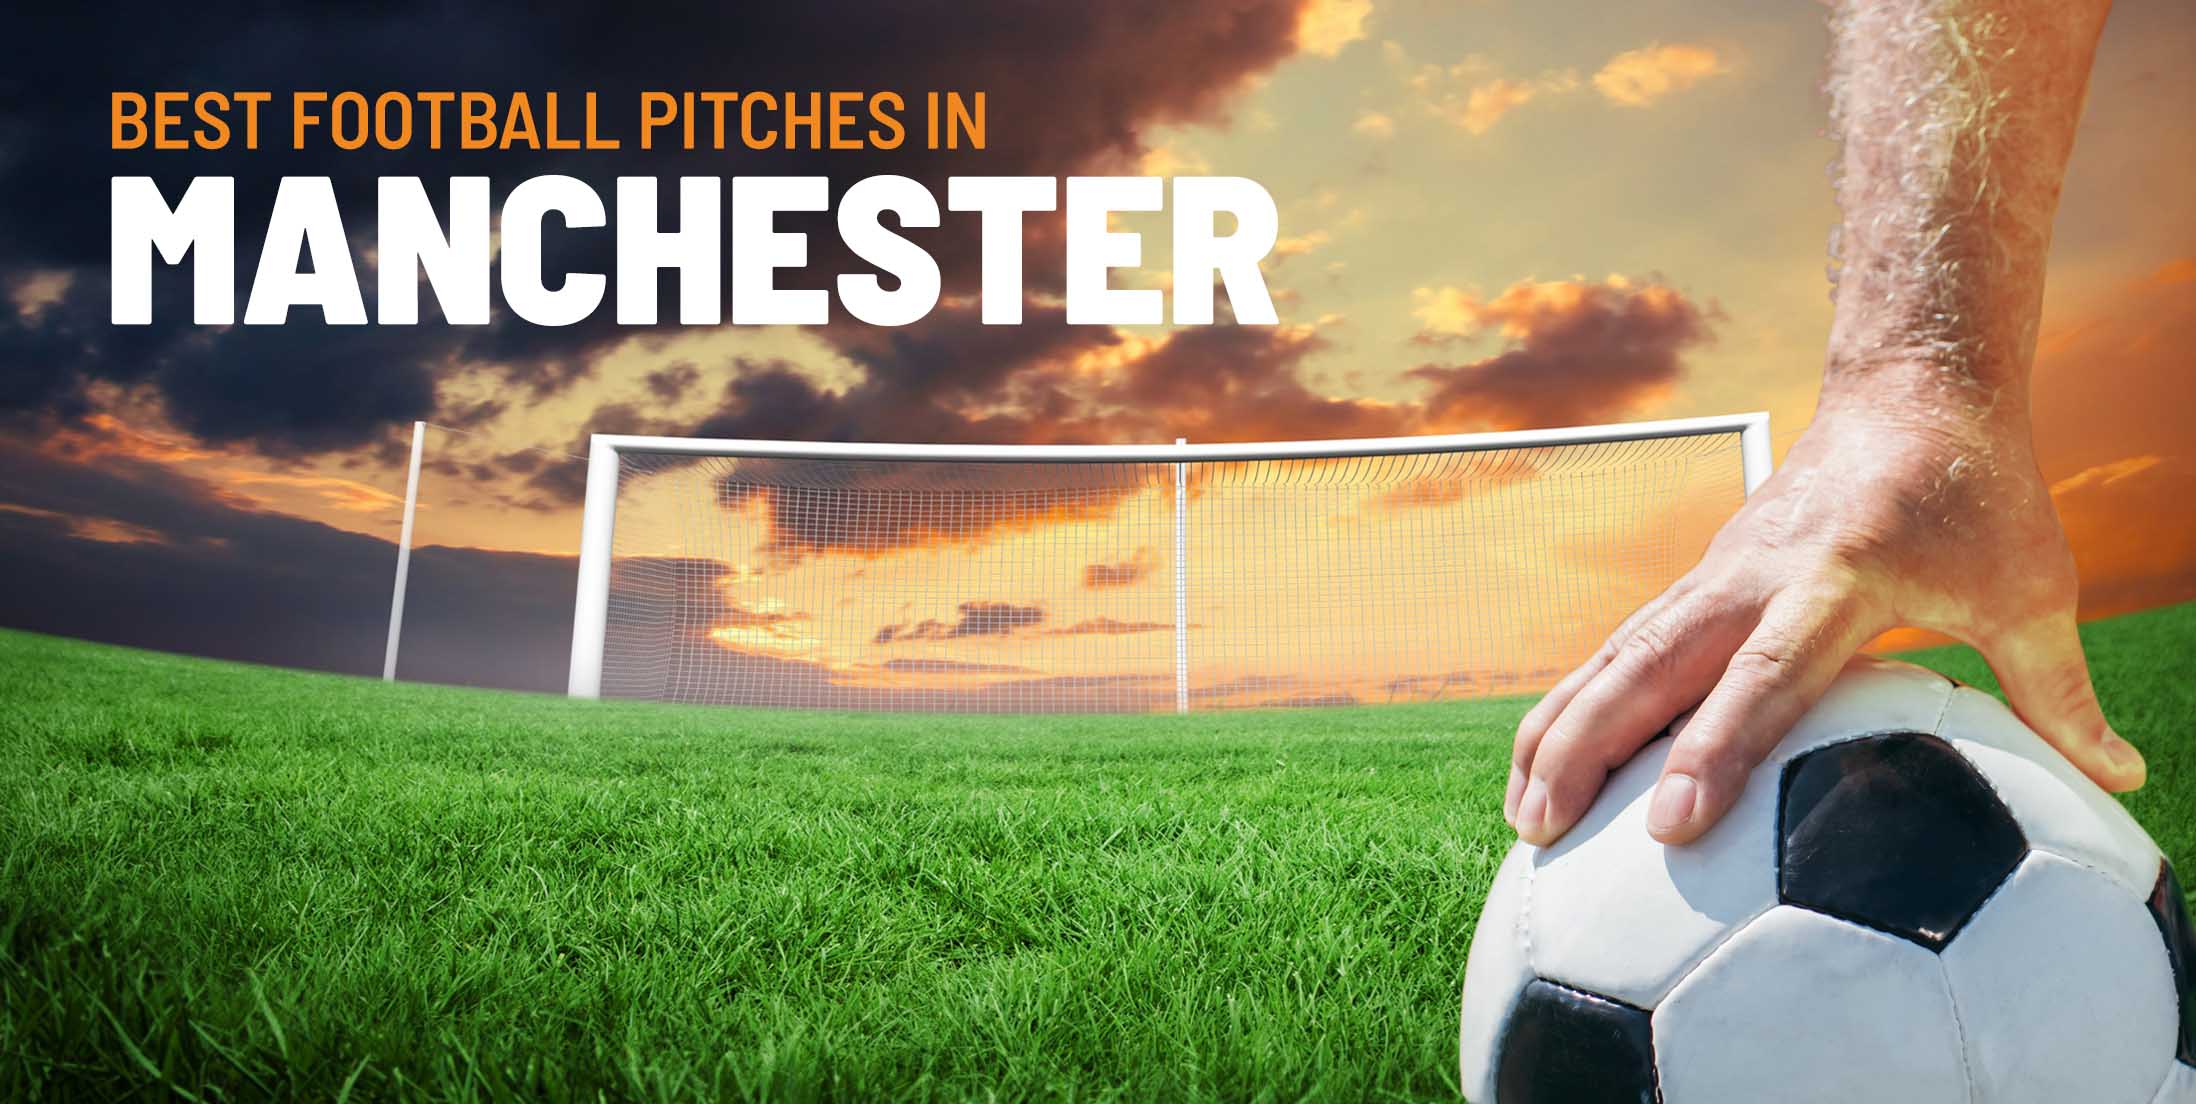 Best Football Pitches in Manchester